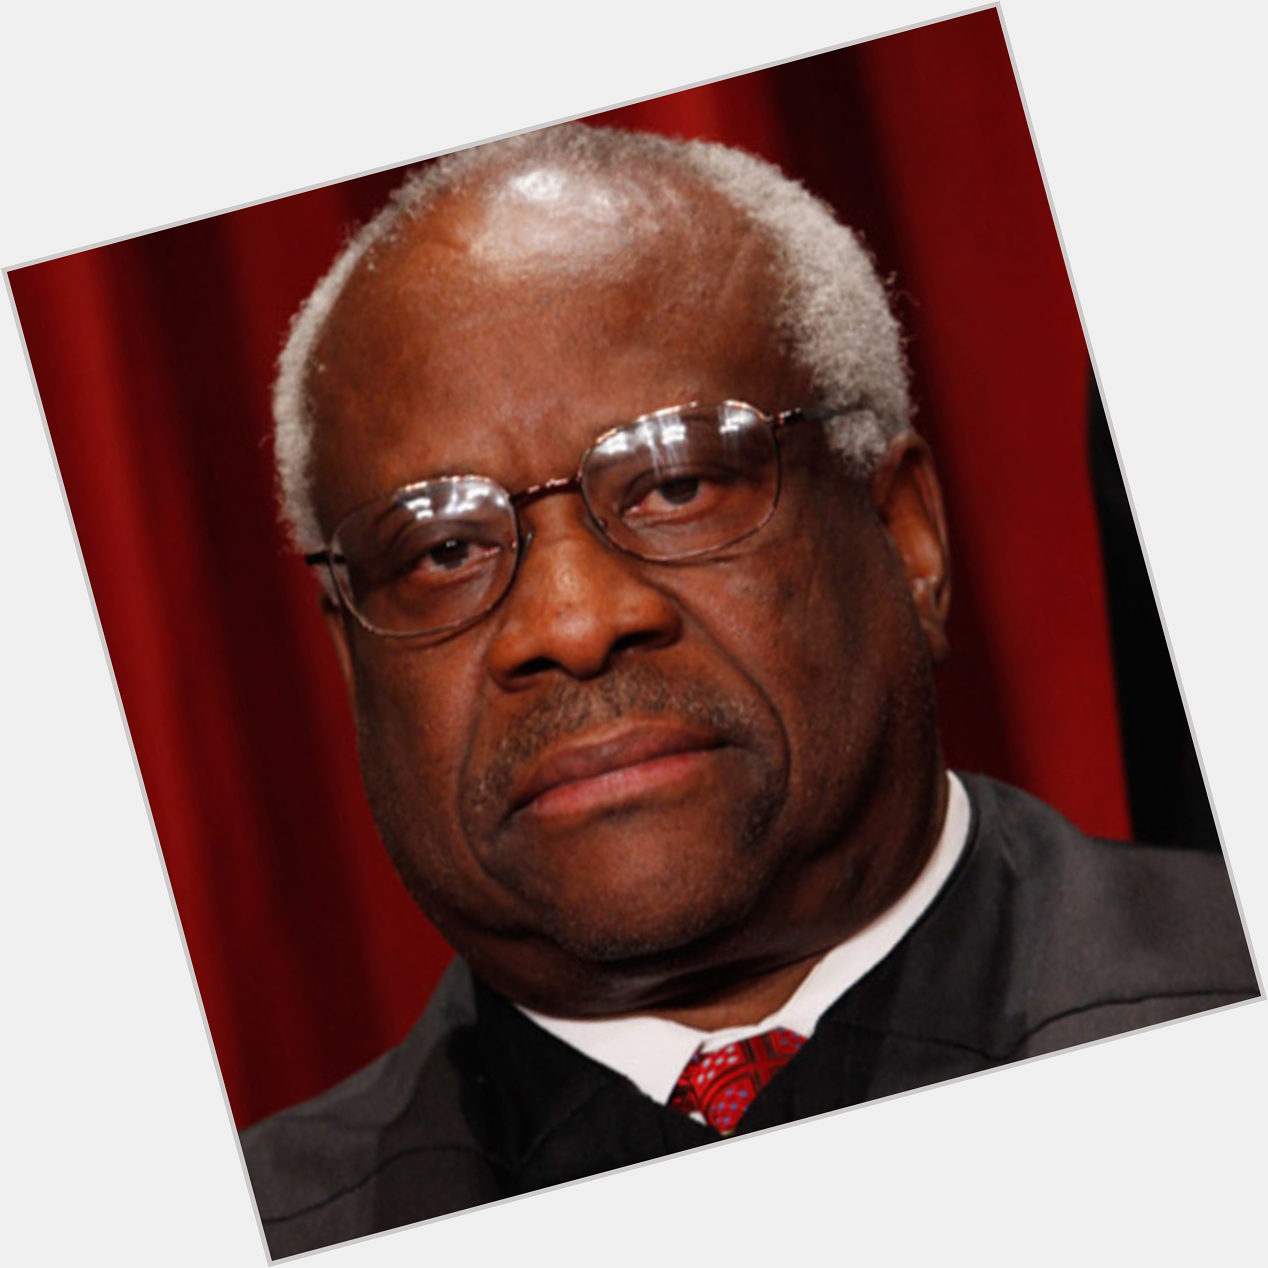 Http://fanpagepress.net/m/C/Clarence Thomas New Pic 1